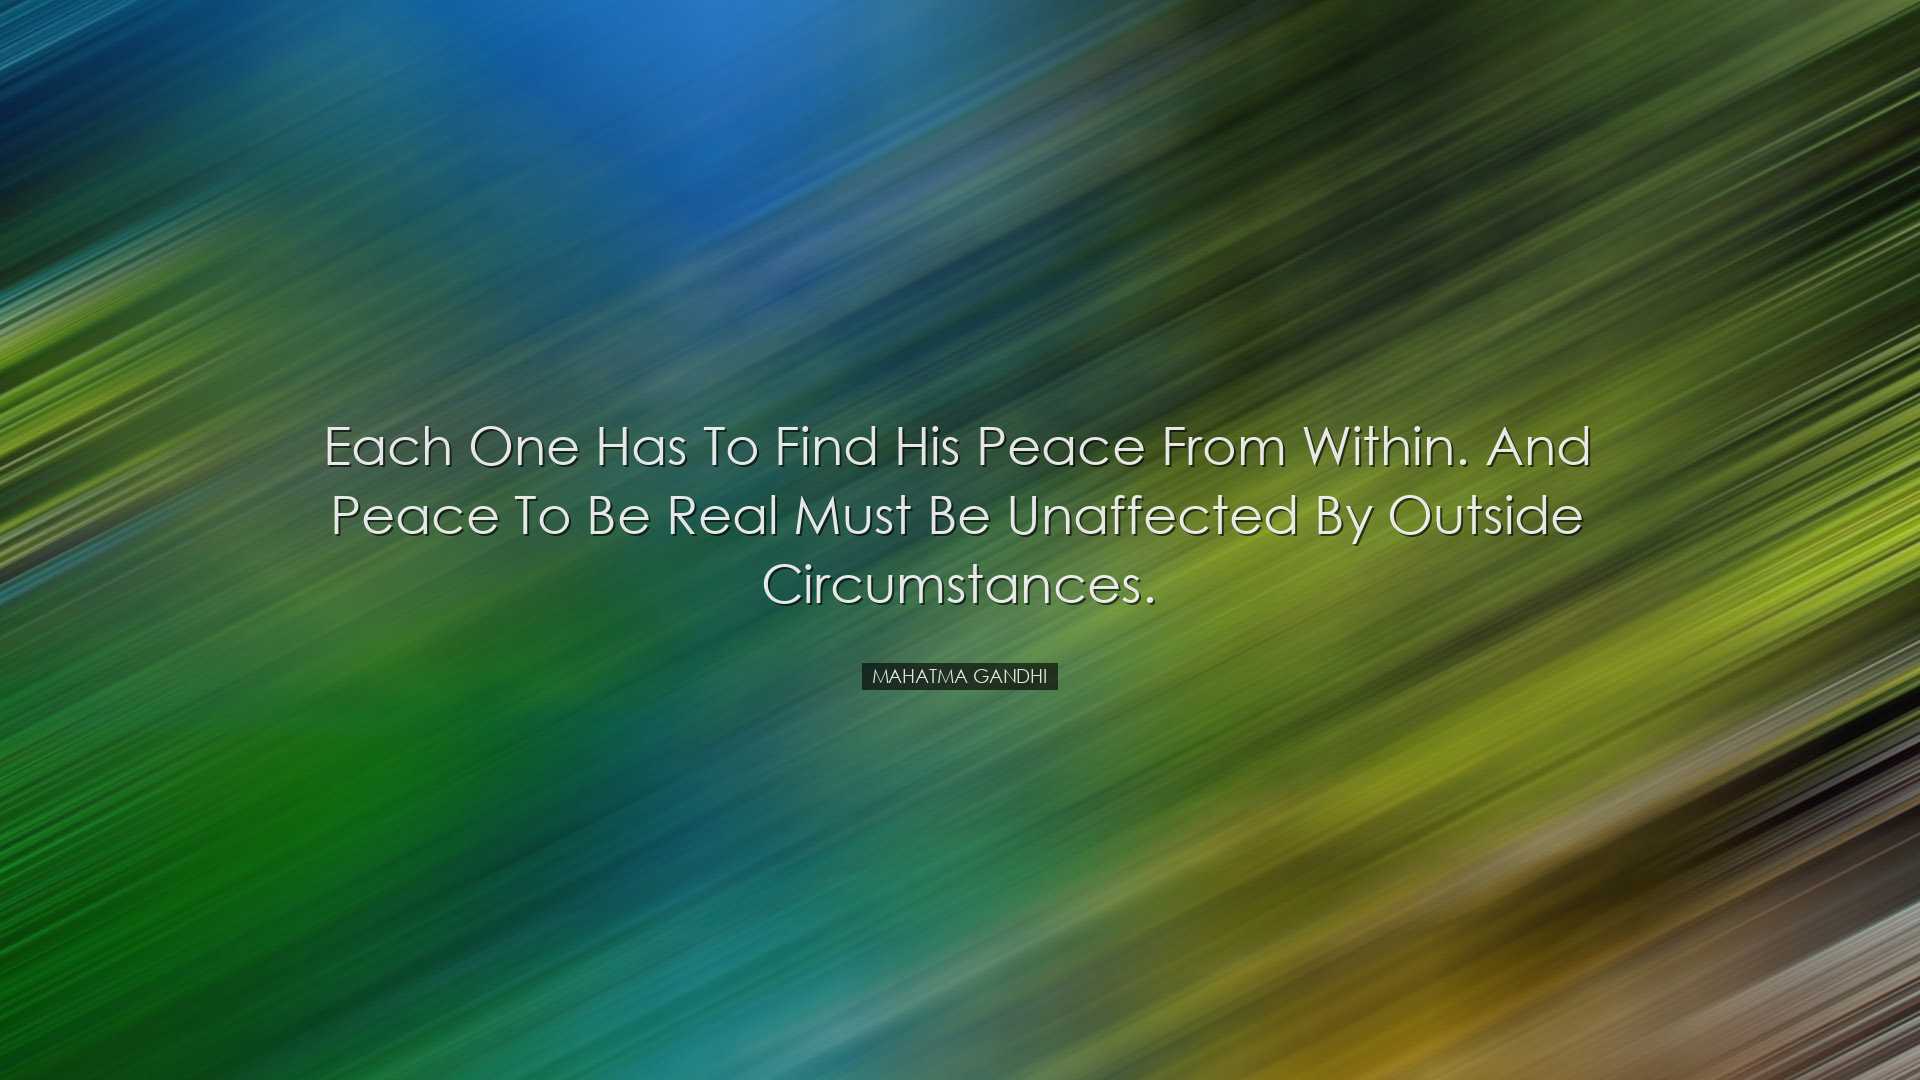 Each one has to find his peace from within. And peace to be real m